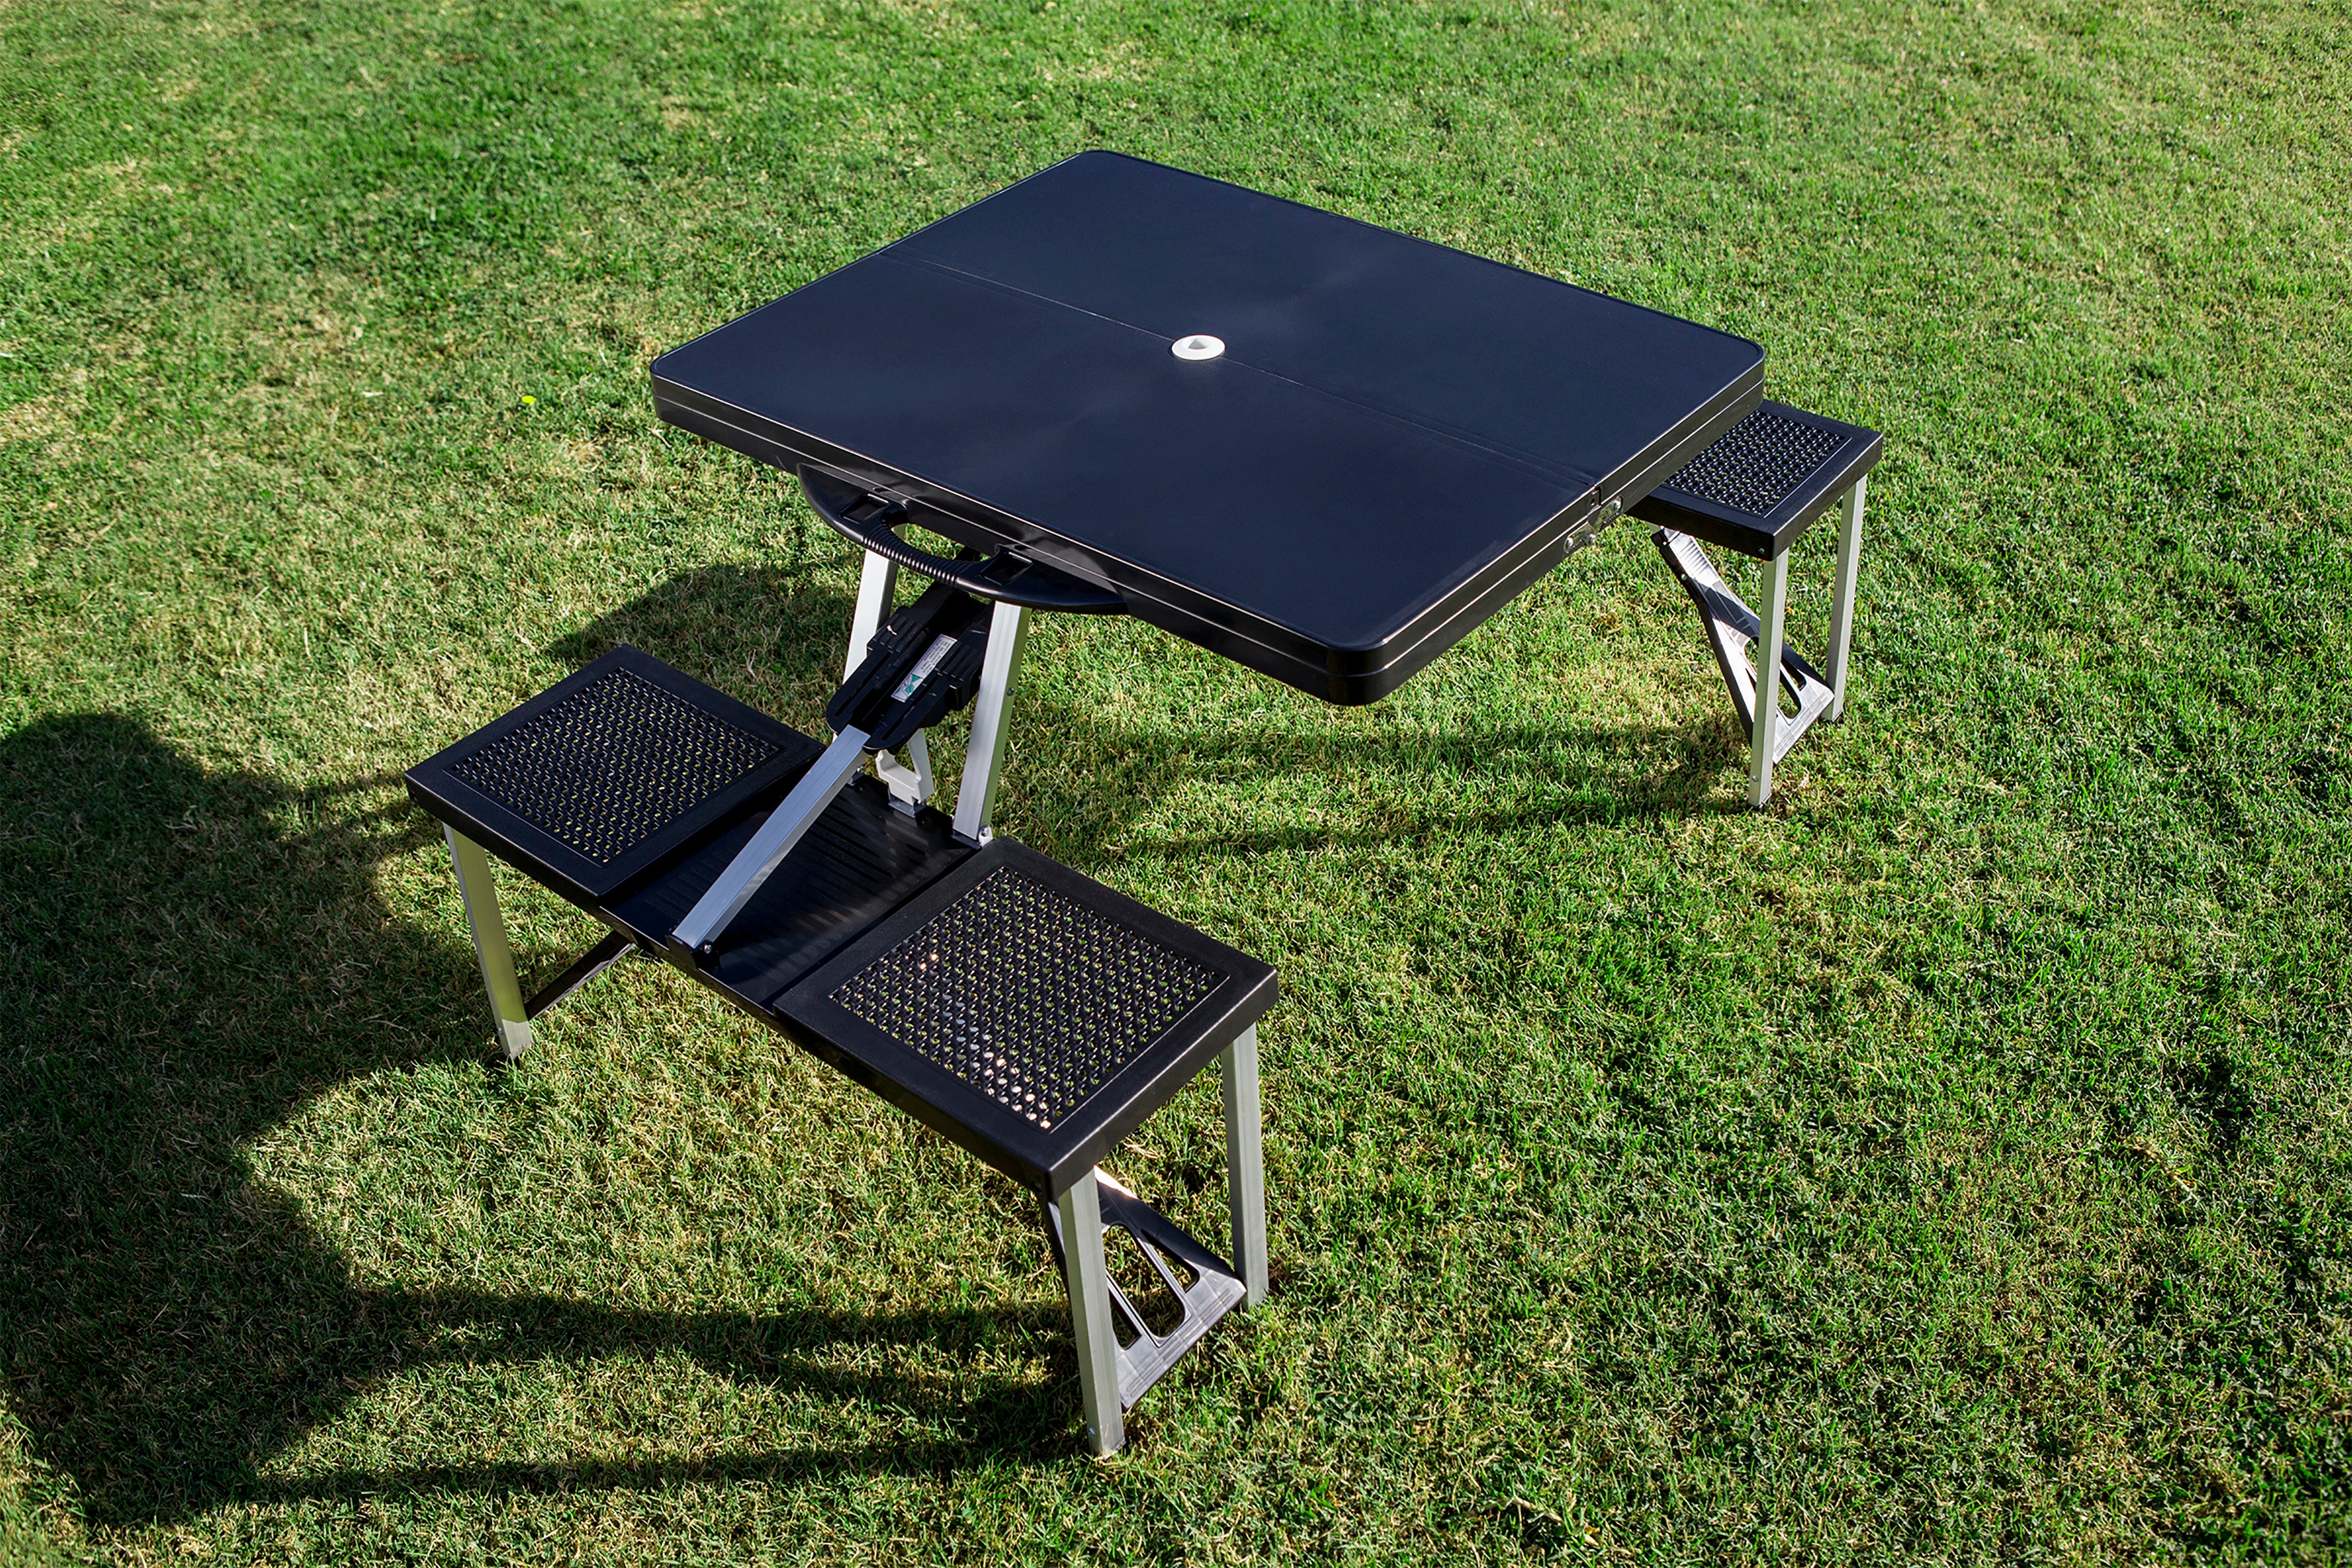 Anaheim Ducks Hockey Rink - Picnic Table Portable Folding Table with Seats